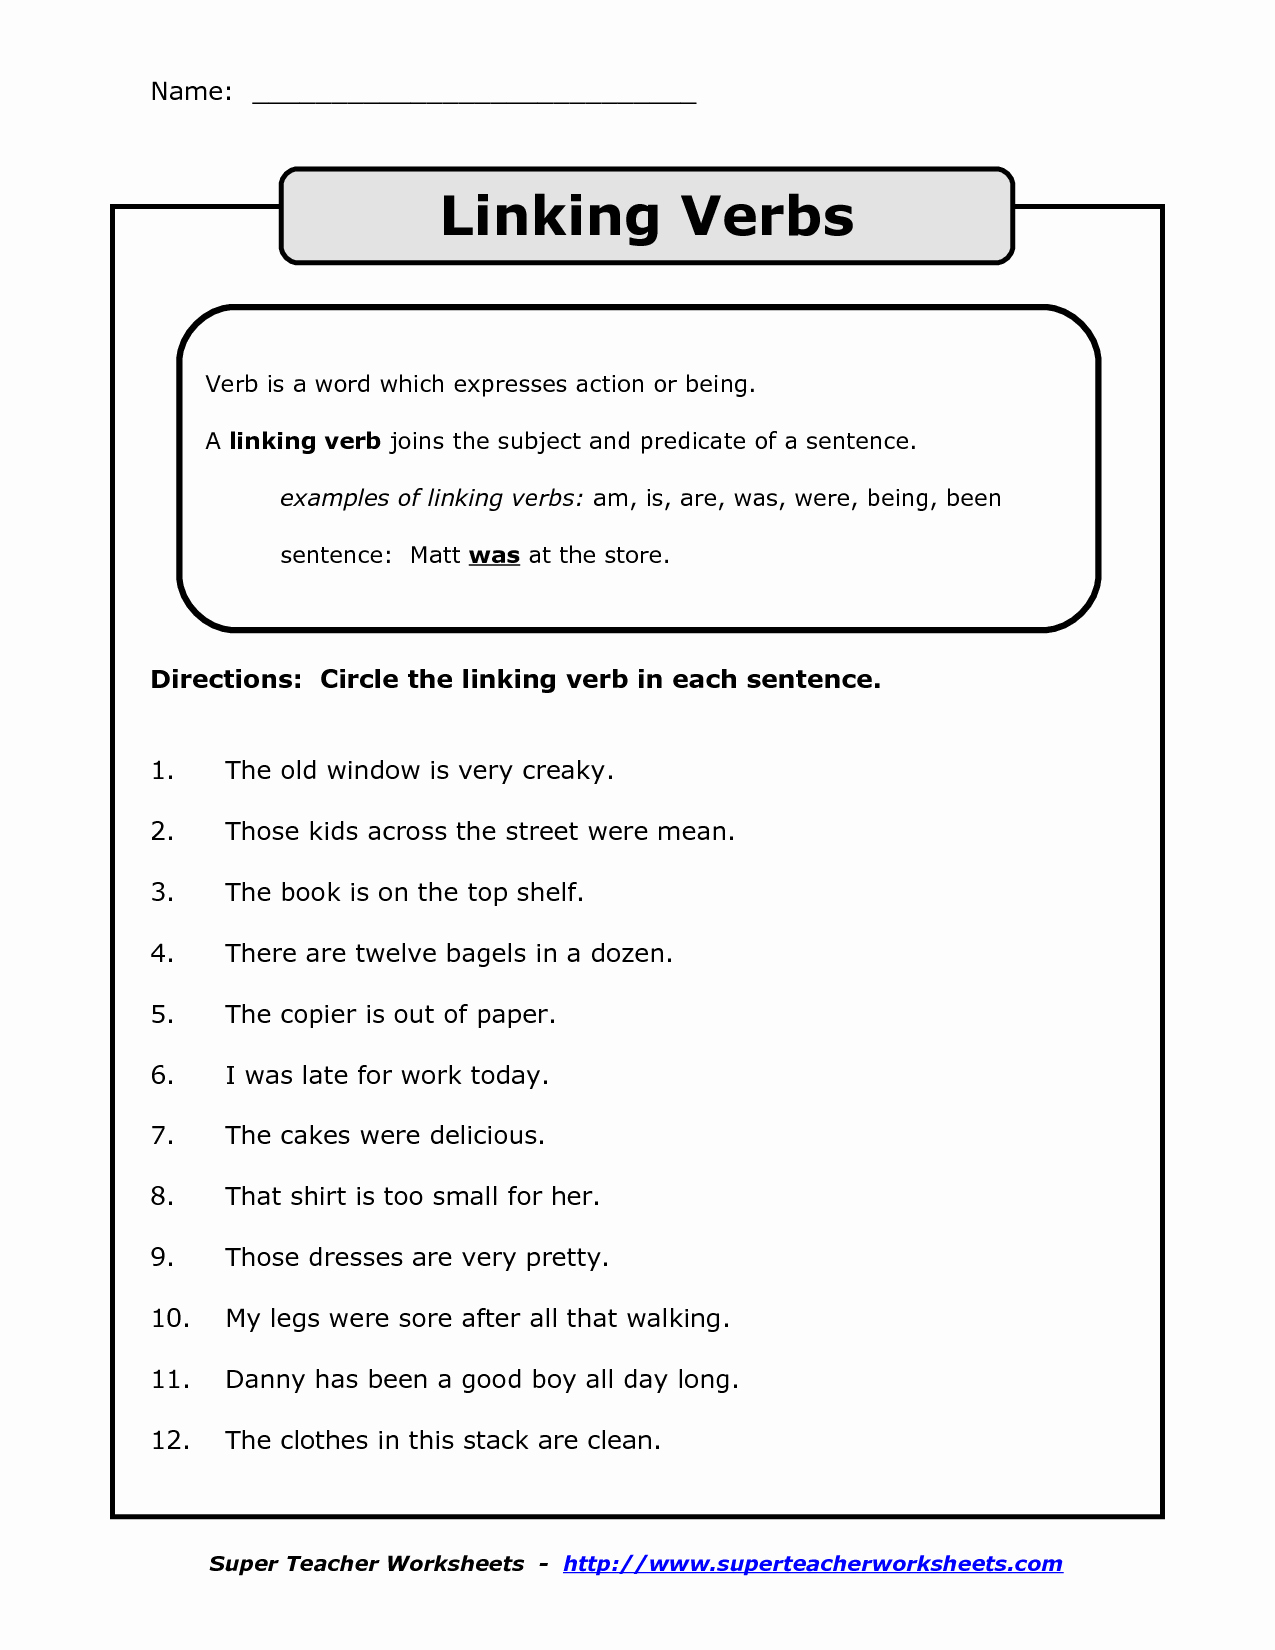 Action and Linking Verbs Worksheet Fresh 16 Best Action Verb Linking Verb Worksheet